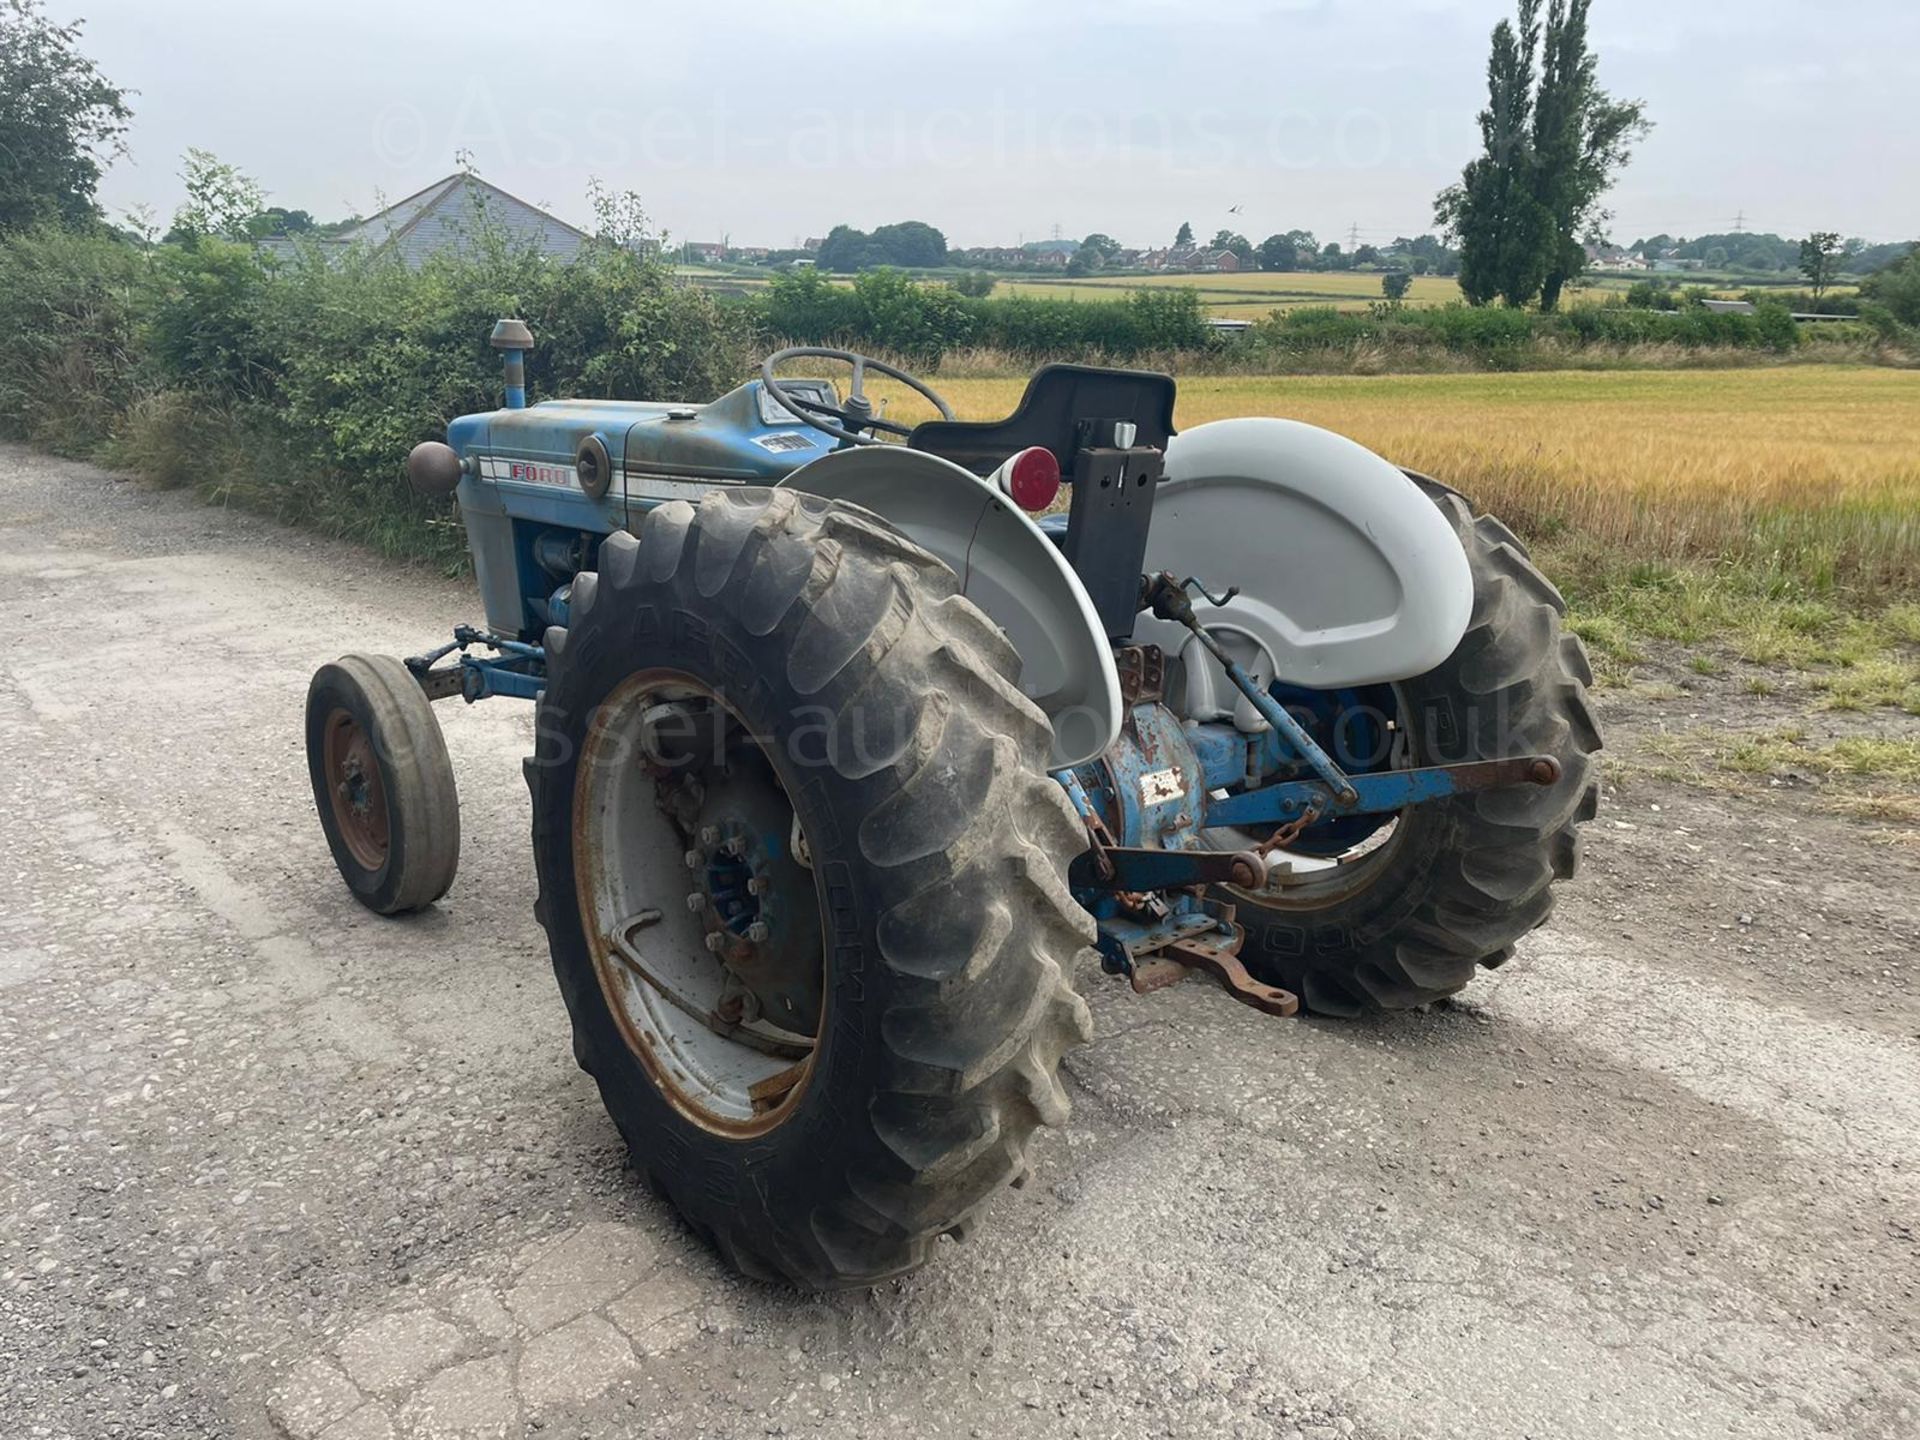 RARE FORD 3000 PETROL VINTAGE TRACTOR, RUNS AND DRIVES, SHOWING 2882 HOURS, ALL GEARS WORK*PLUS VAT* - Image 4 of 7